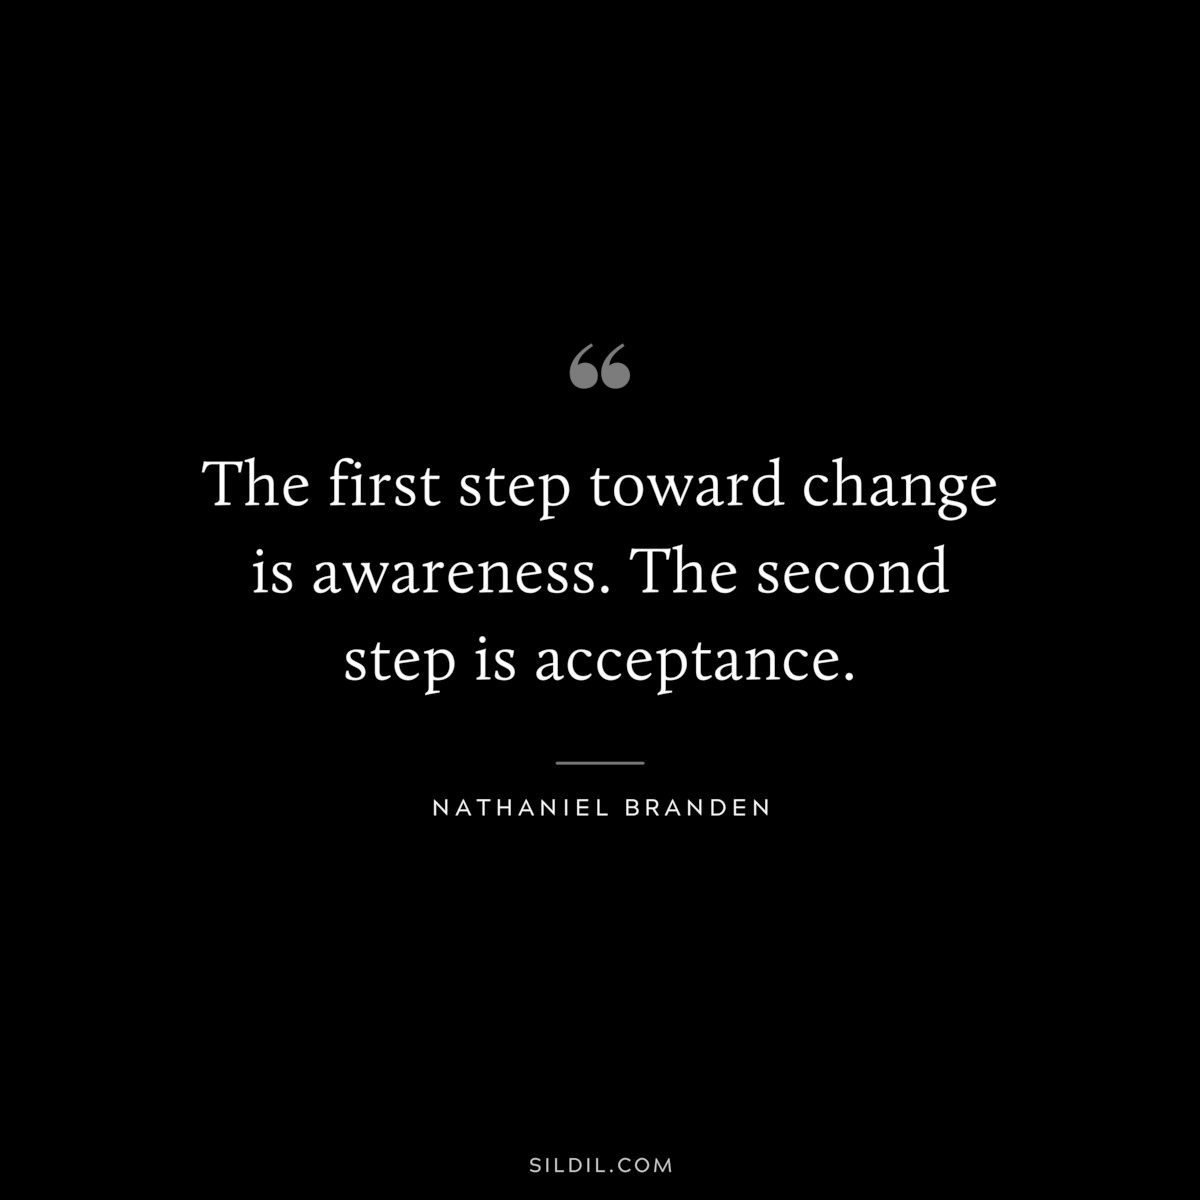 The first step toward change is awareness. The second step is acceptance. ― Nathaniel Branden